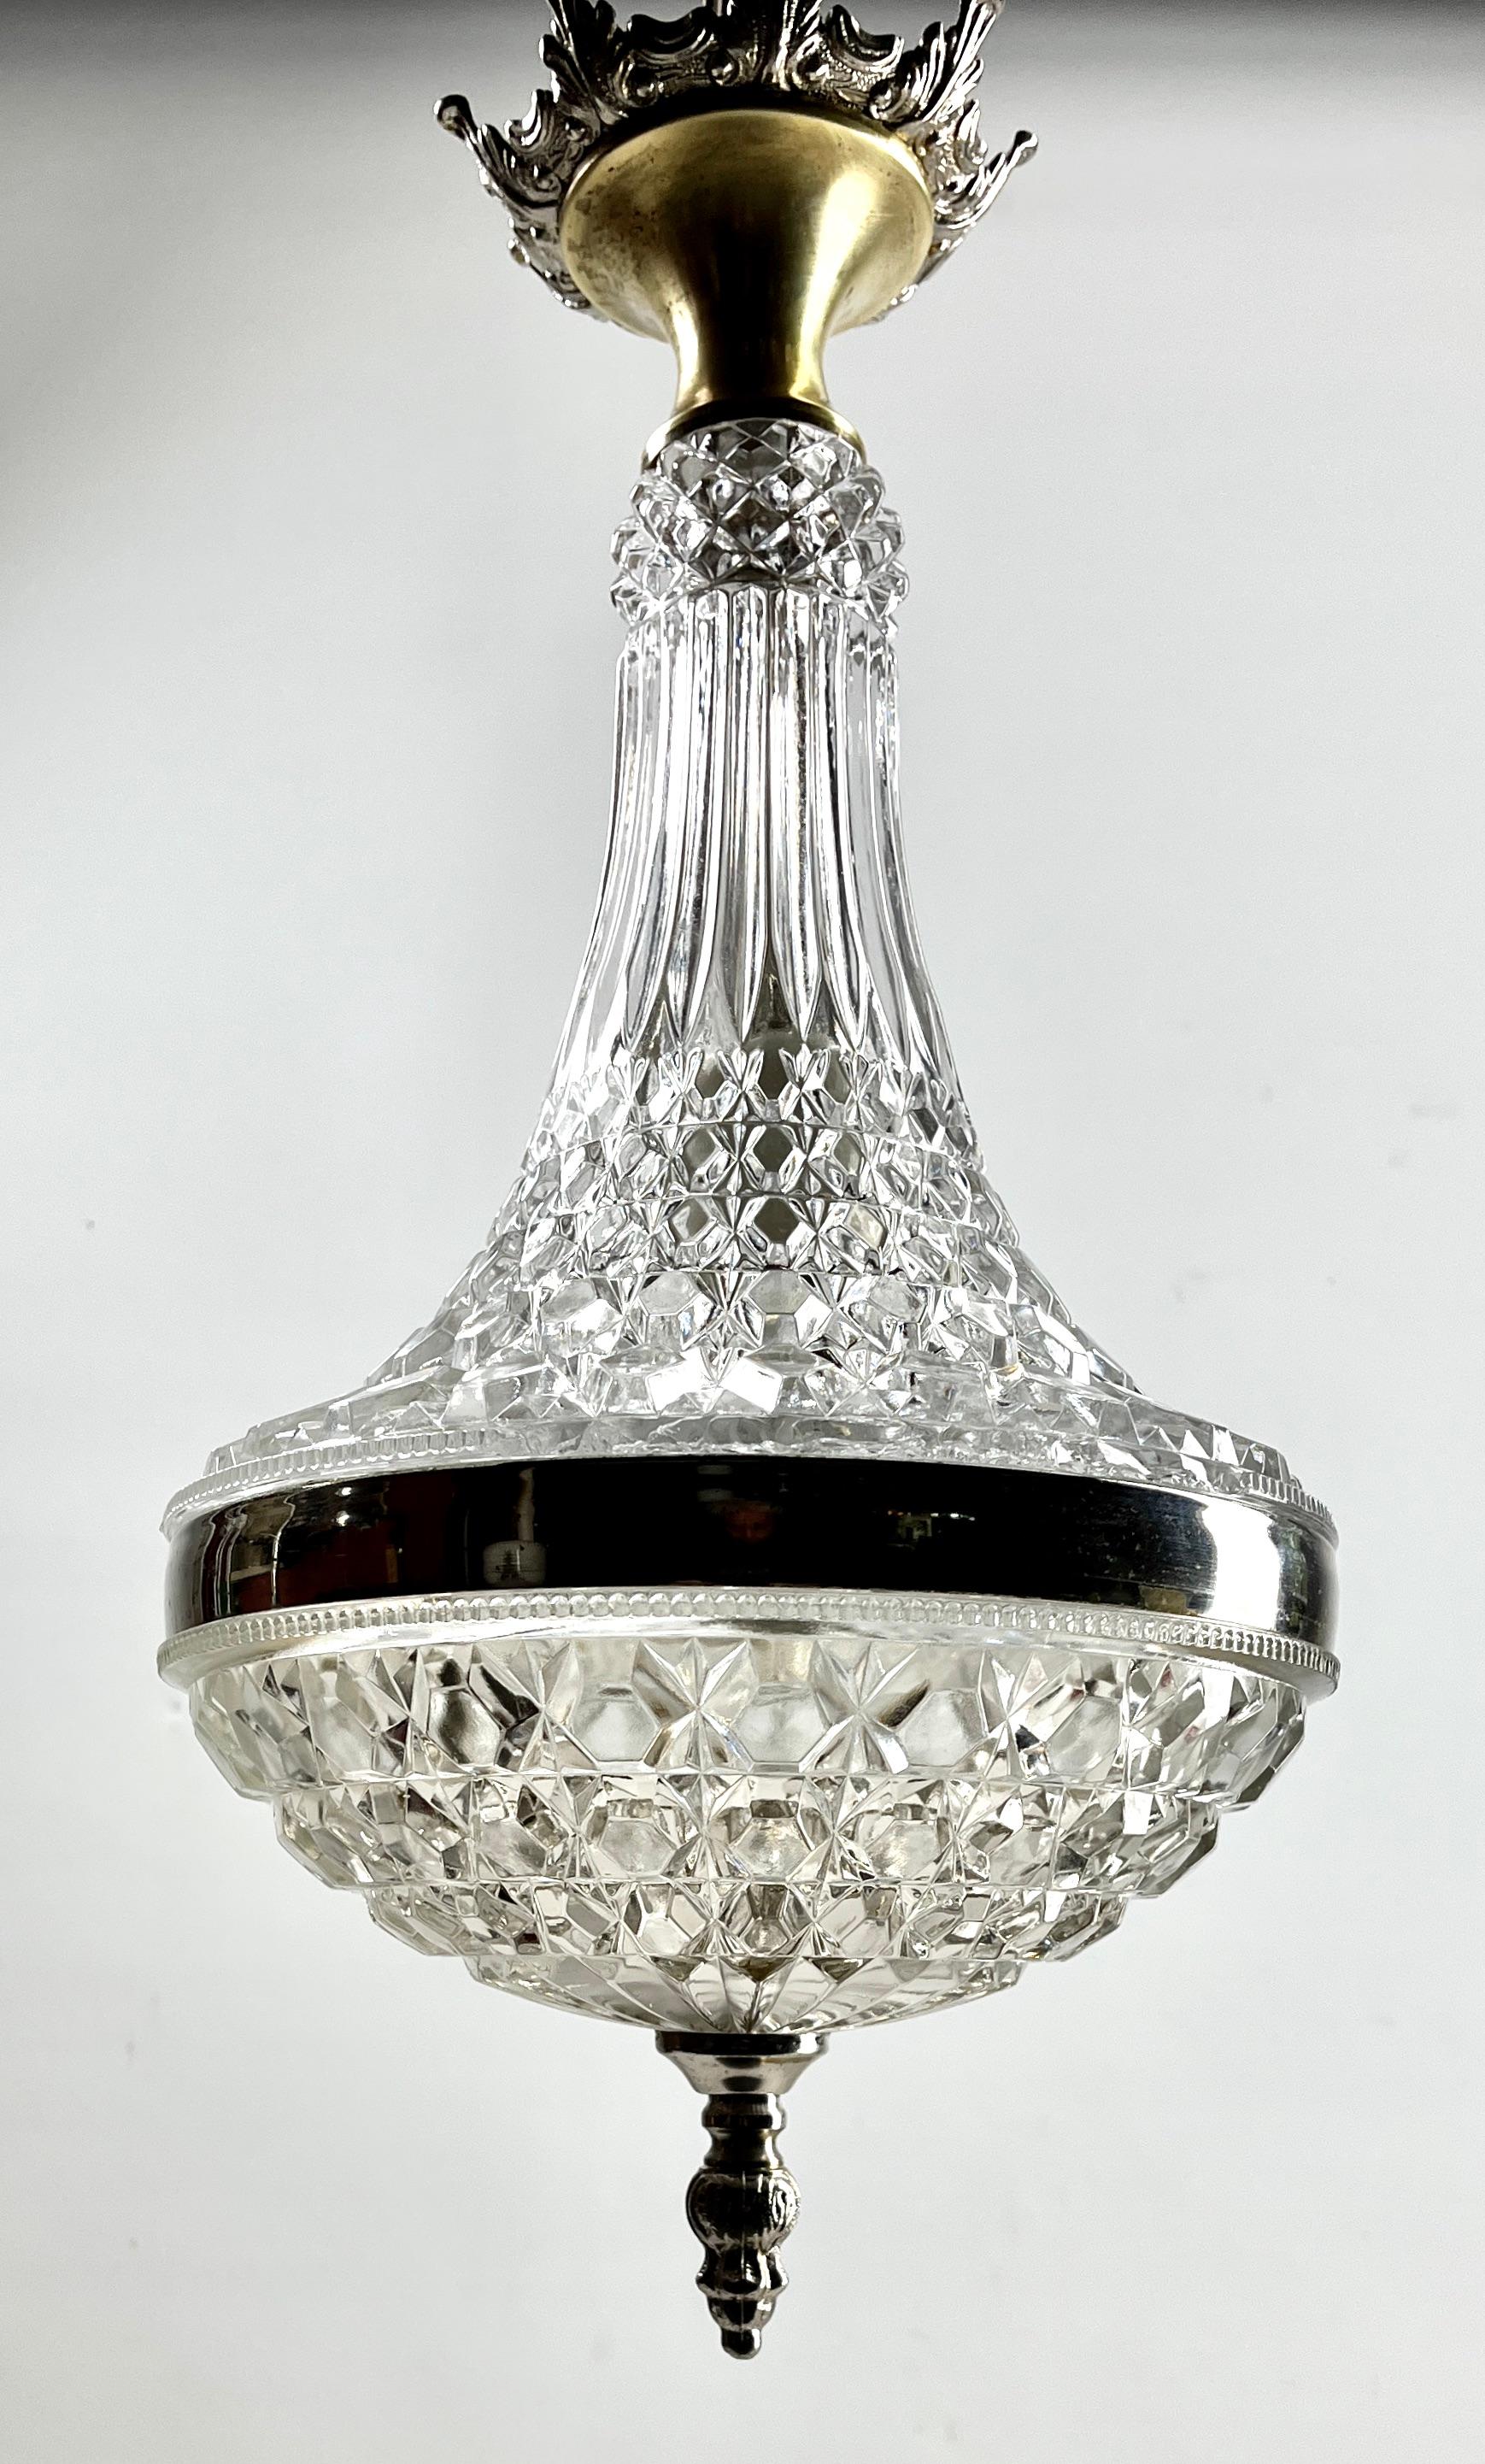 Hand-Crafted Art Deco Halophane Ceiling Lamp, Scailmont Belgium Glass Shade, 1930s